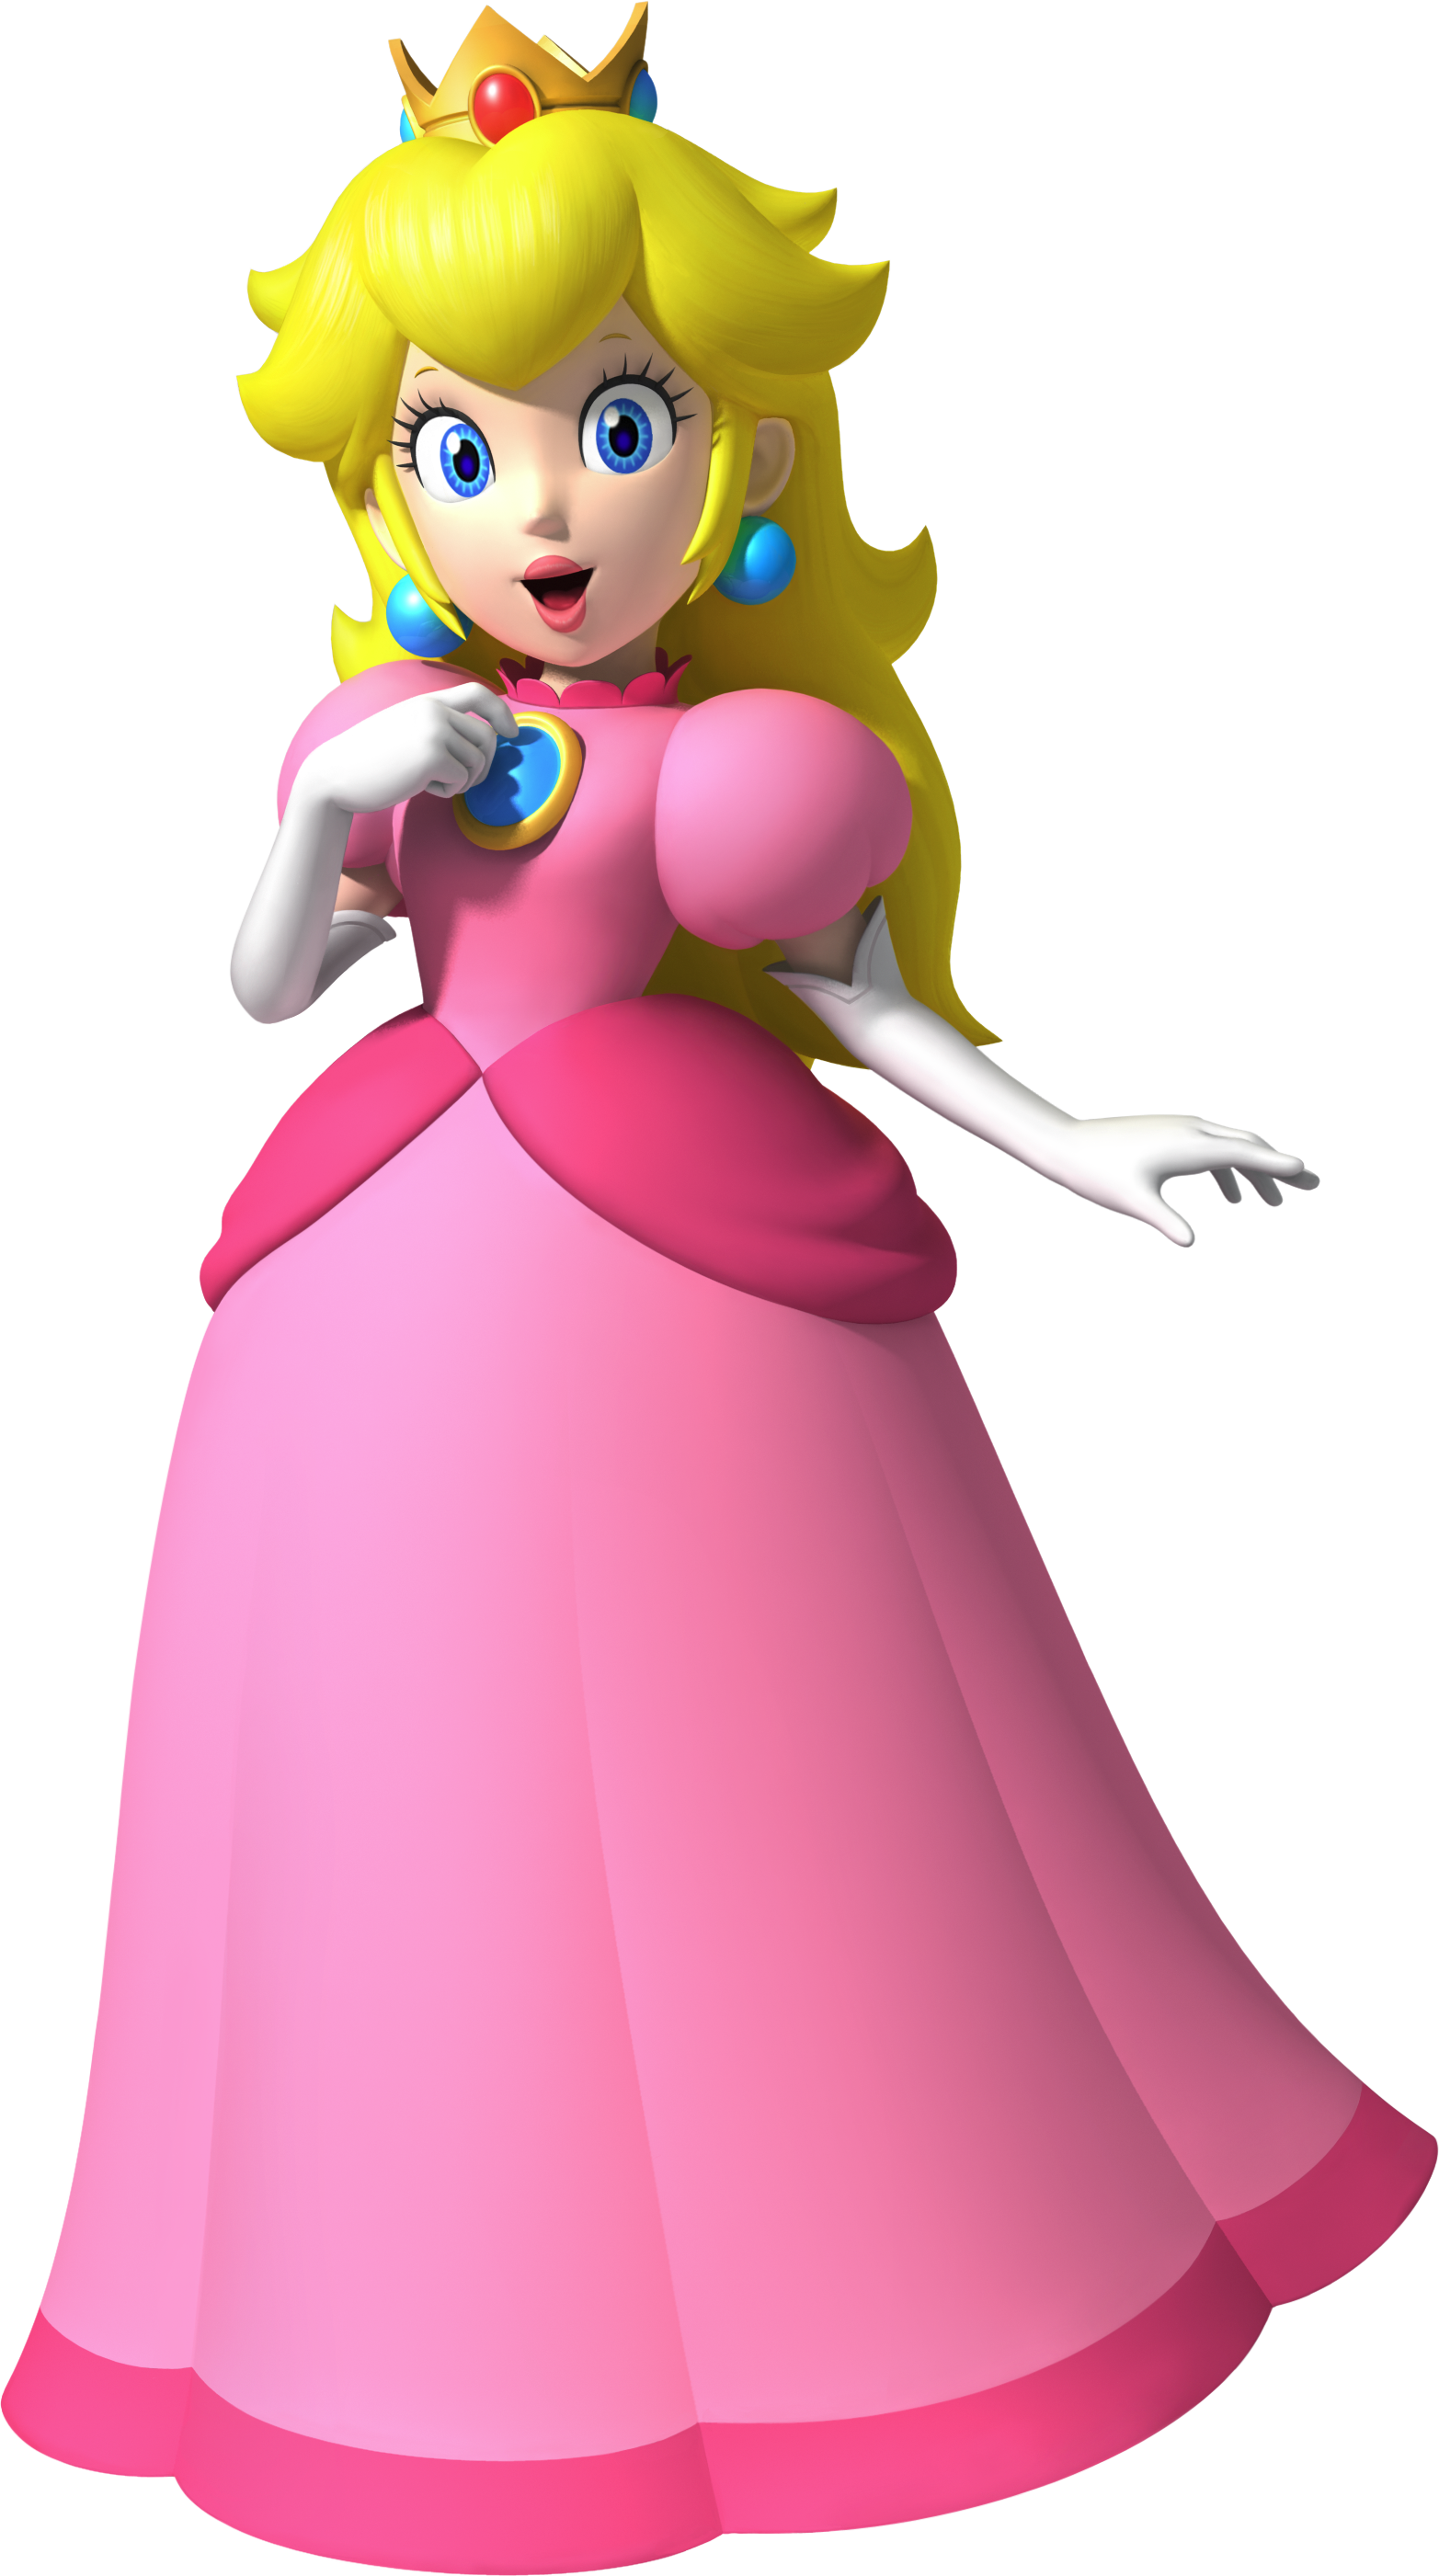 Artwork of Princess Peach in New Super Mario Bros. Wii (also used in Mario and Sonic at the London 2012 Olympic Games, Mario Party: Island Tour and Mario Kart Tour)